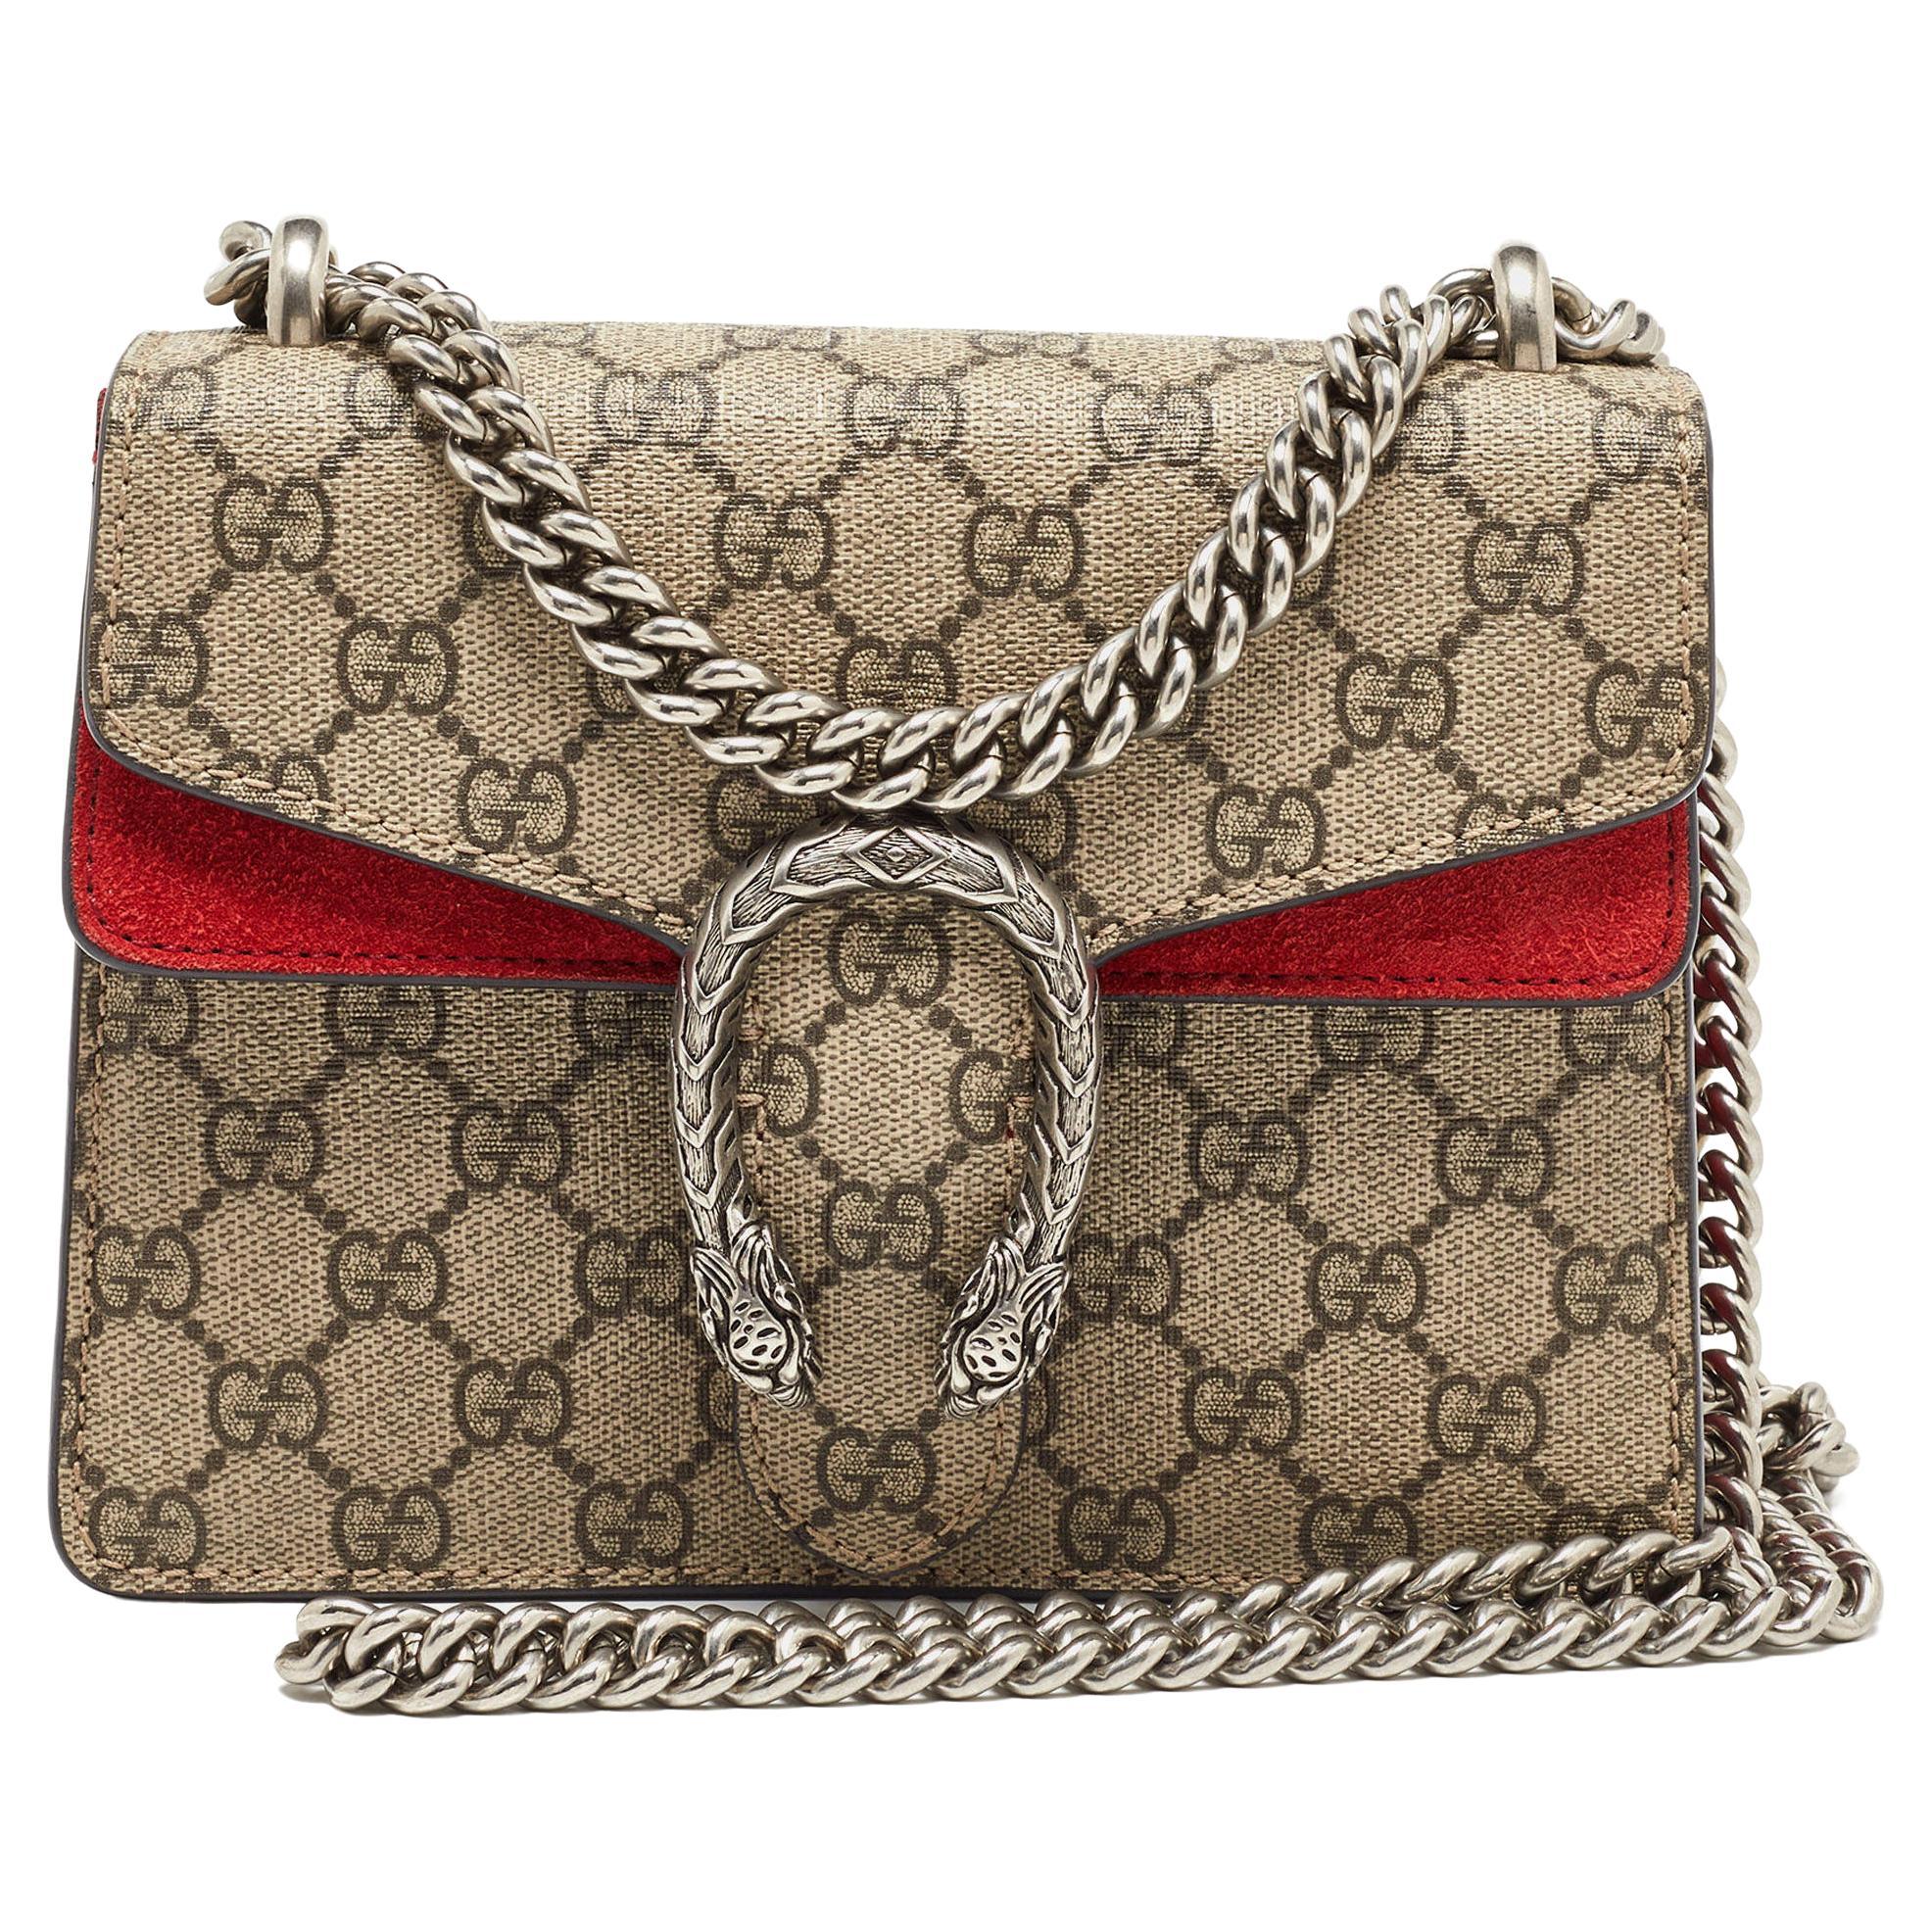 Gucci Beige/Red GG Supreme Canvas and Suede Mini Dionysus Shoulder Bag